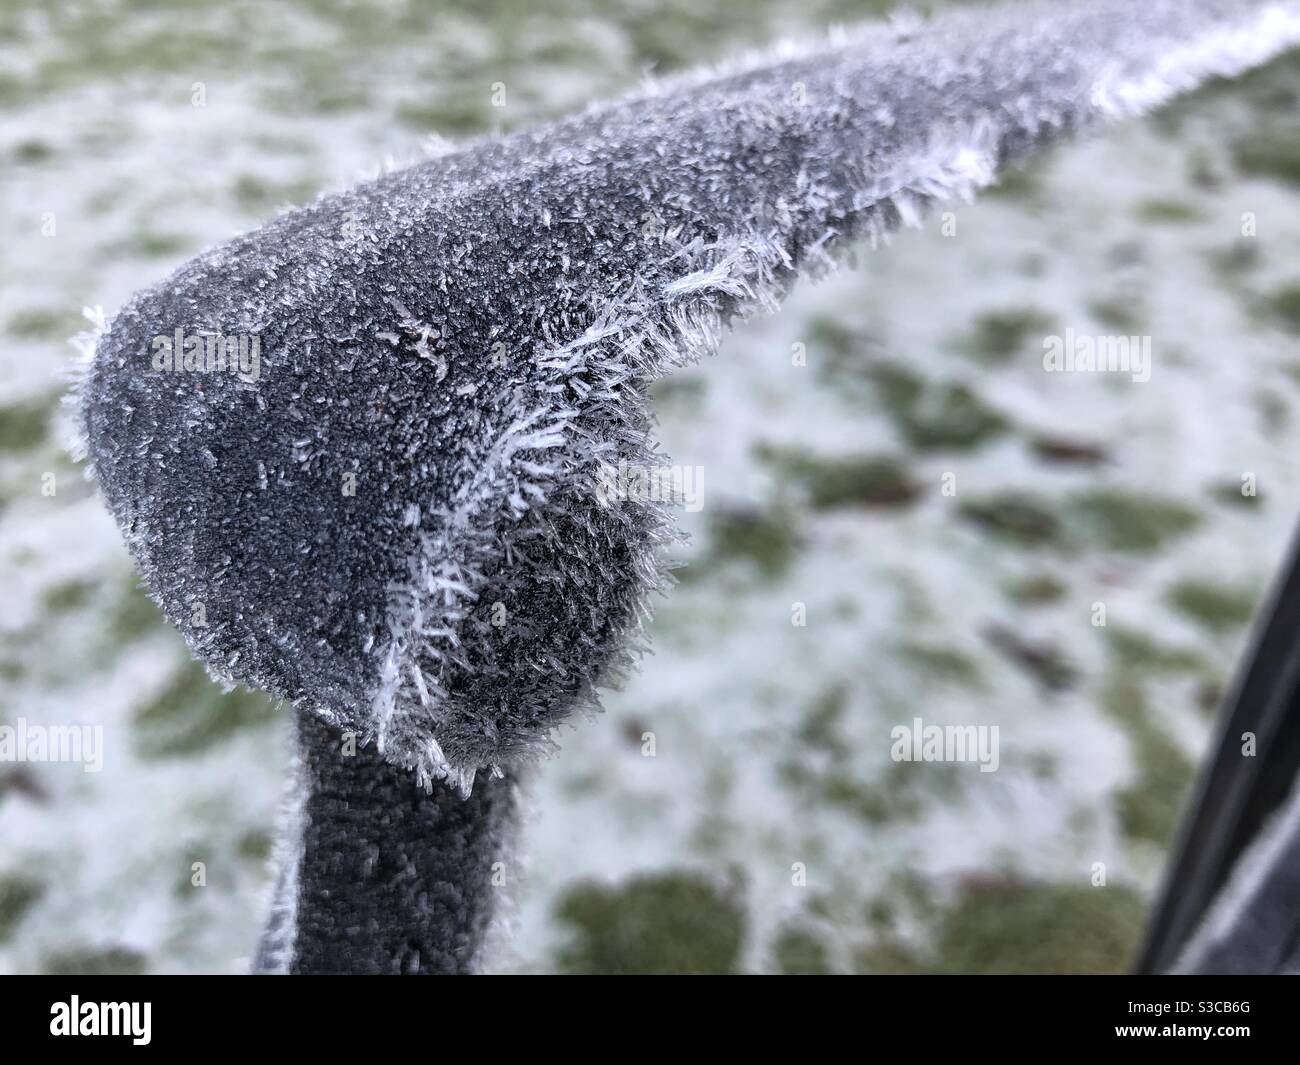 Ice crystals on the arm of a metal chair in a garden in winter, United Kingdom Stock Photo